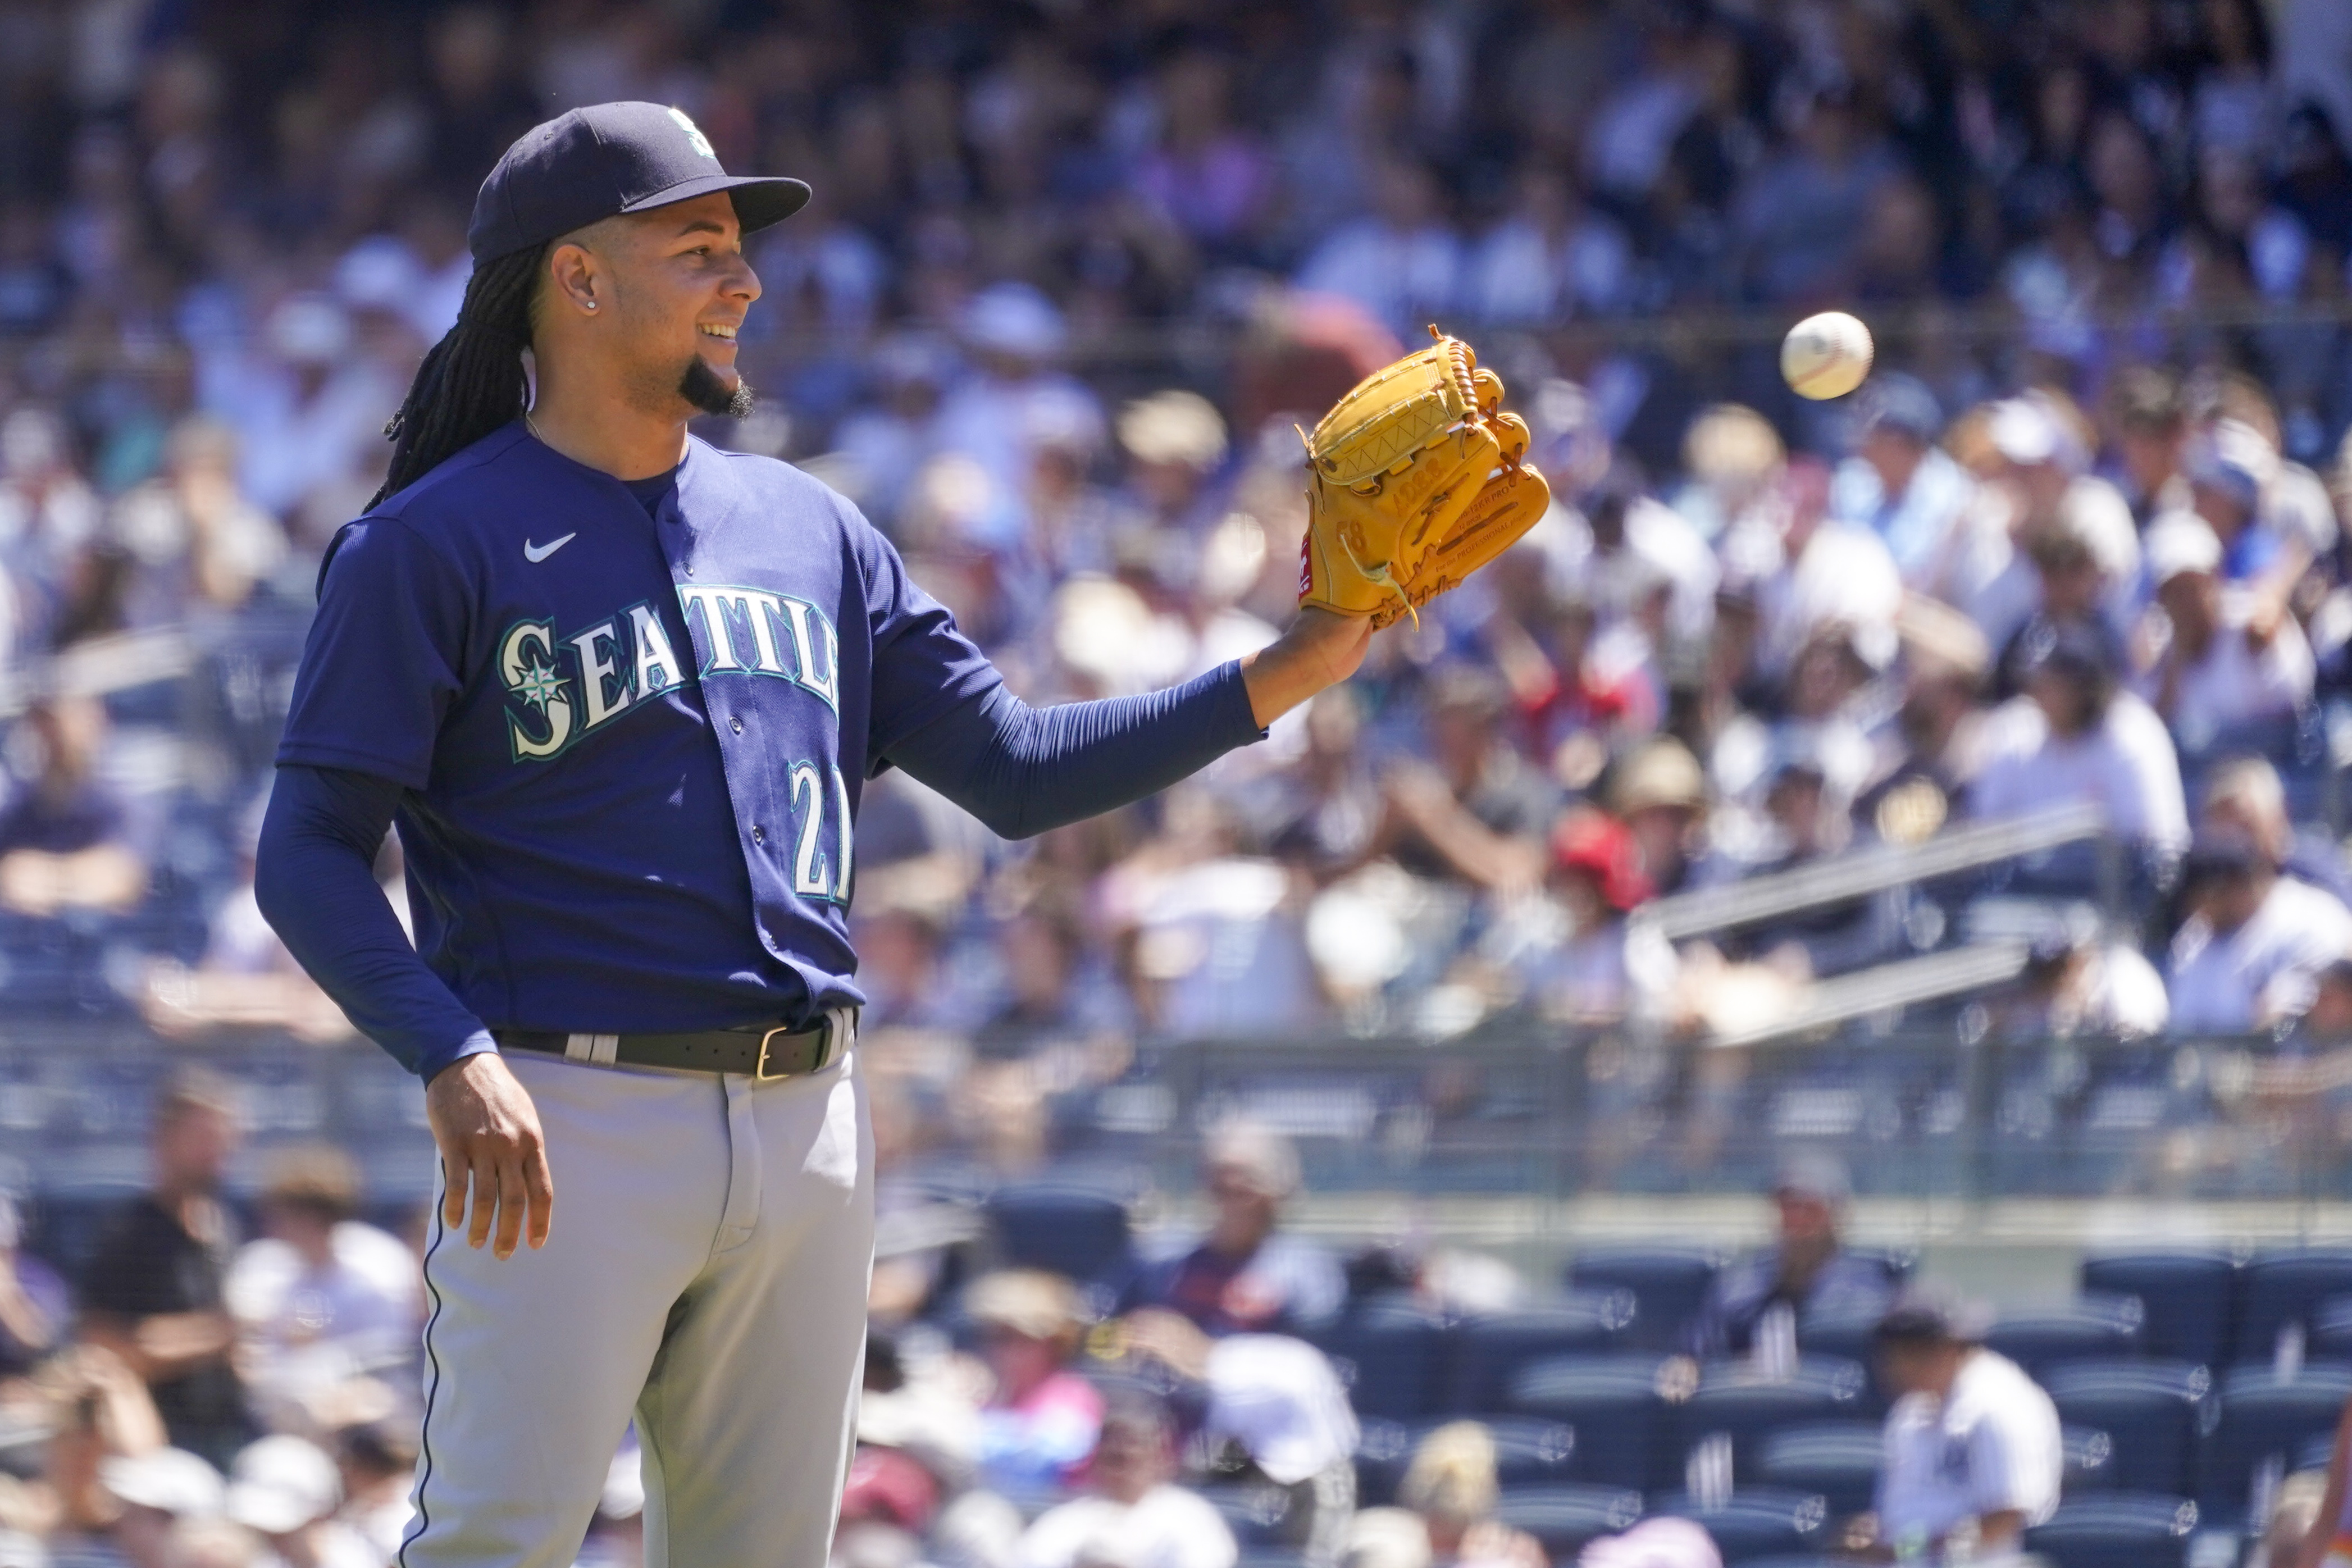 Luis Castillo to make Mariners debut against Yankees